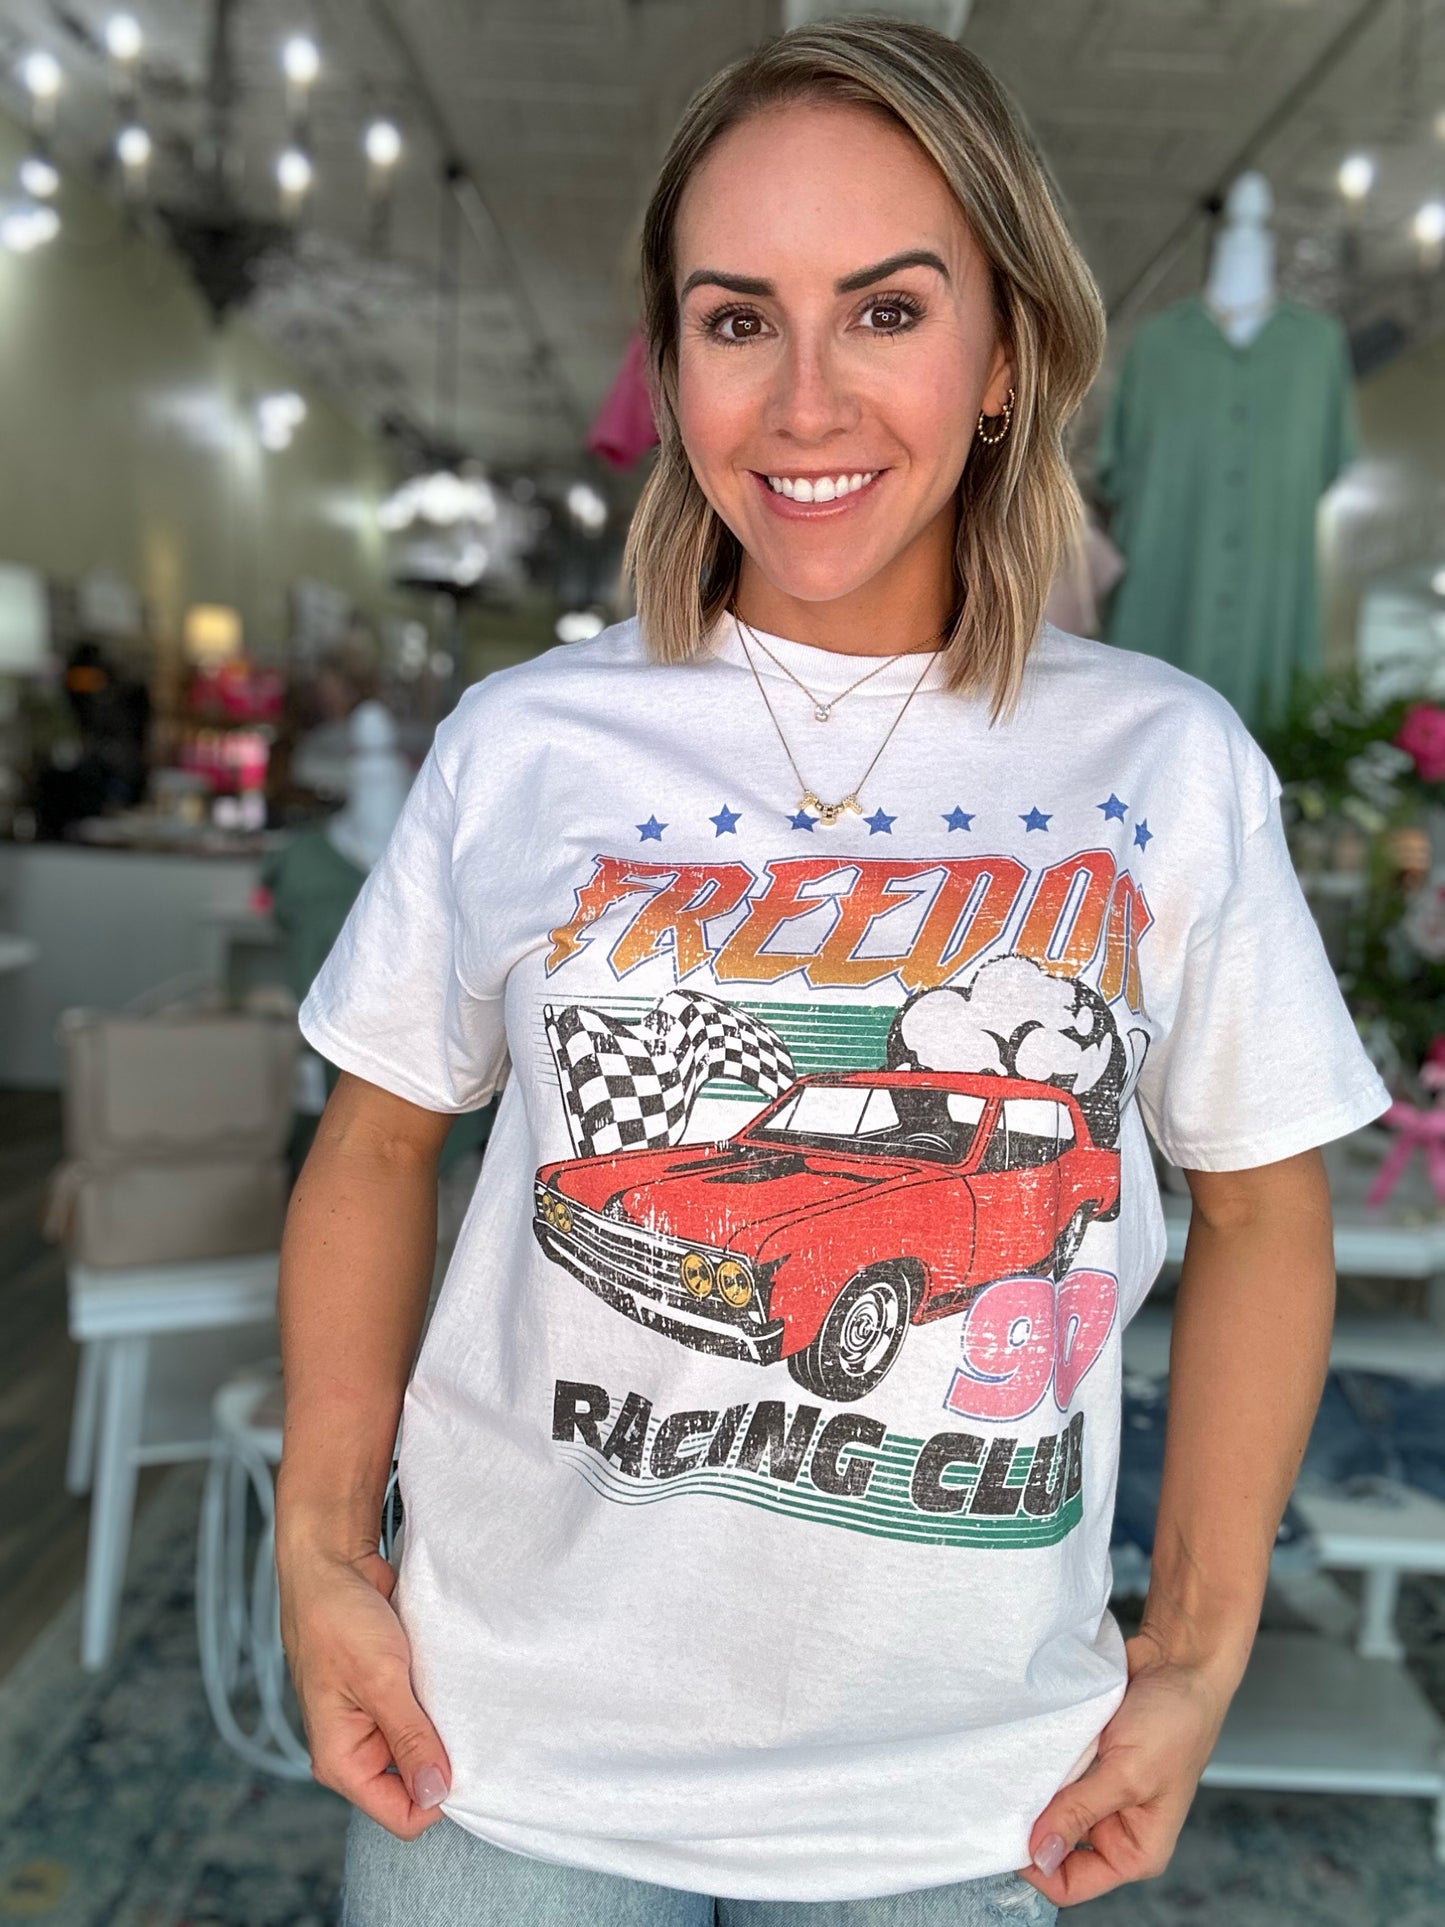 NEW! Vintage Retro Racing Club oversized graphic tee in white